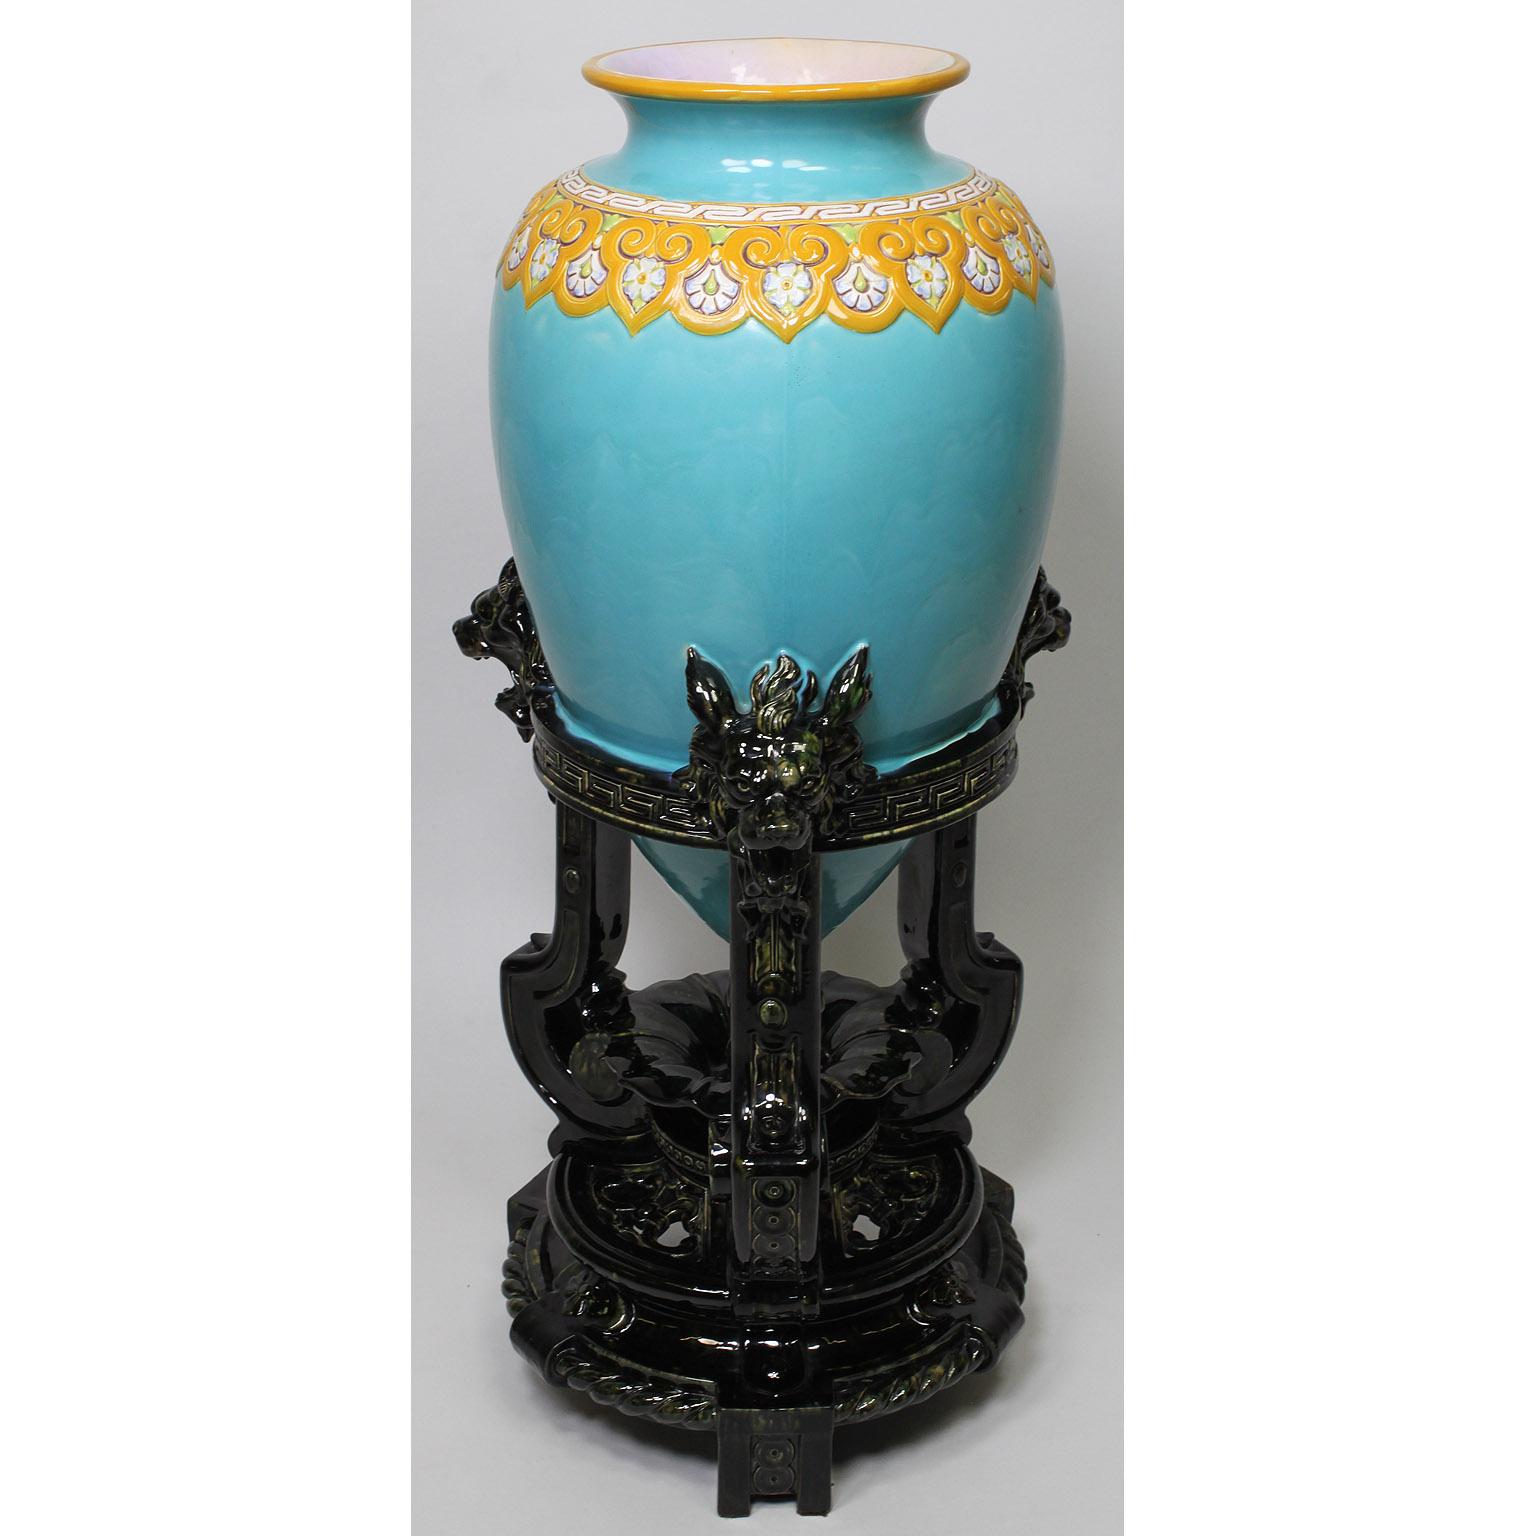 A large and Impressive English Mintons majolica turquoise-ground 'Chinese' celadon vase, design attributed to Christopher dresser, date code for year 1875. The tall vase with a flared yellow mouth, the neck decorated with a yellow and white floral